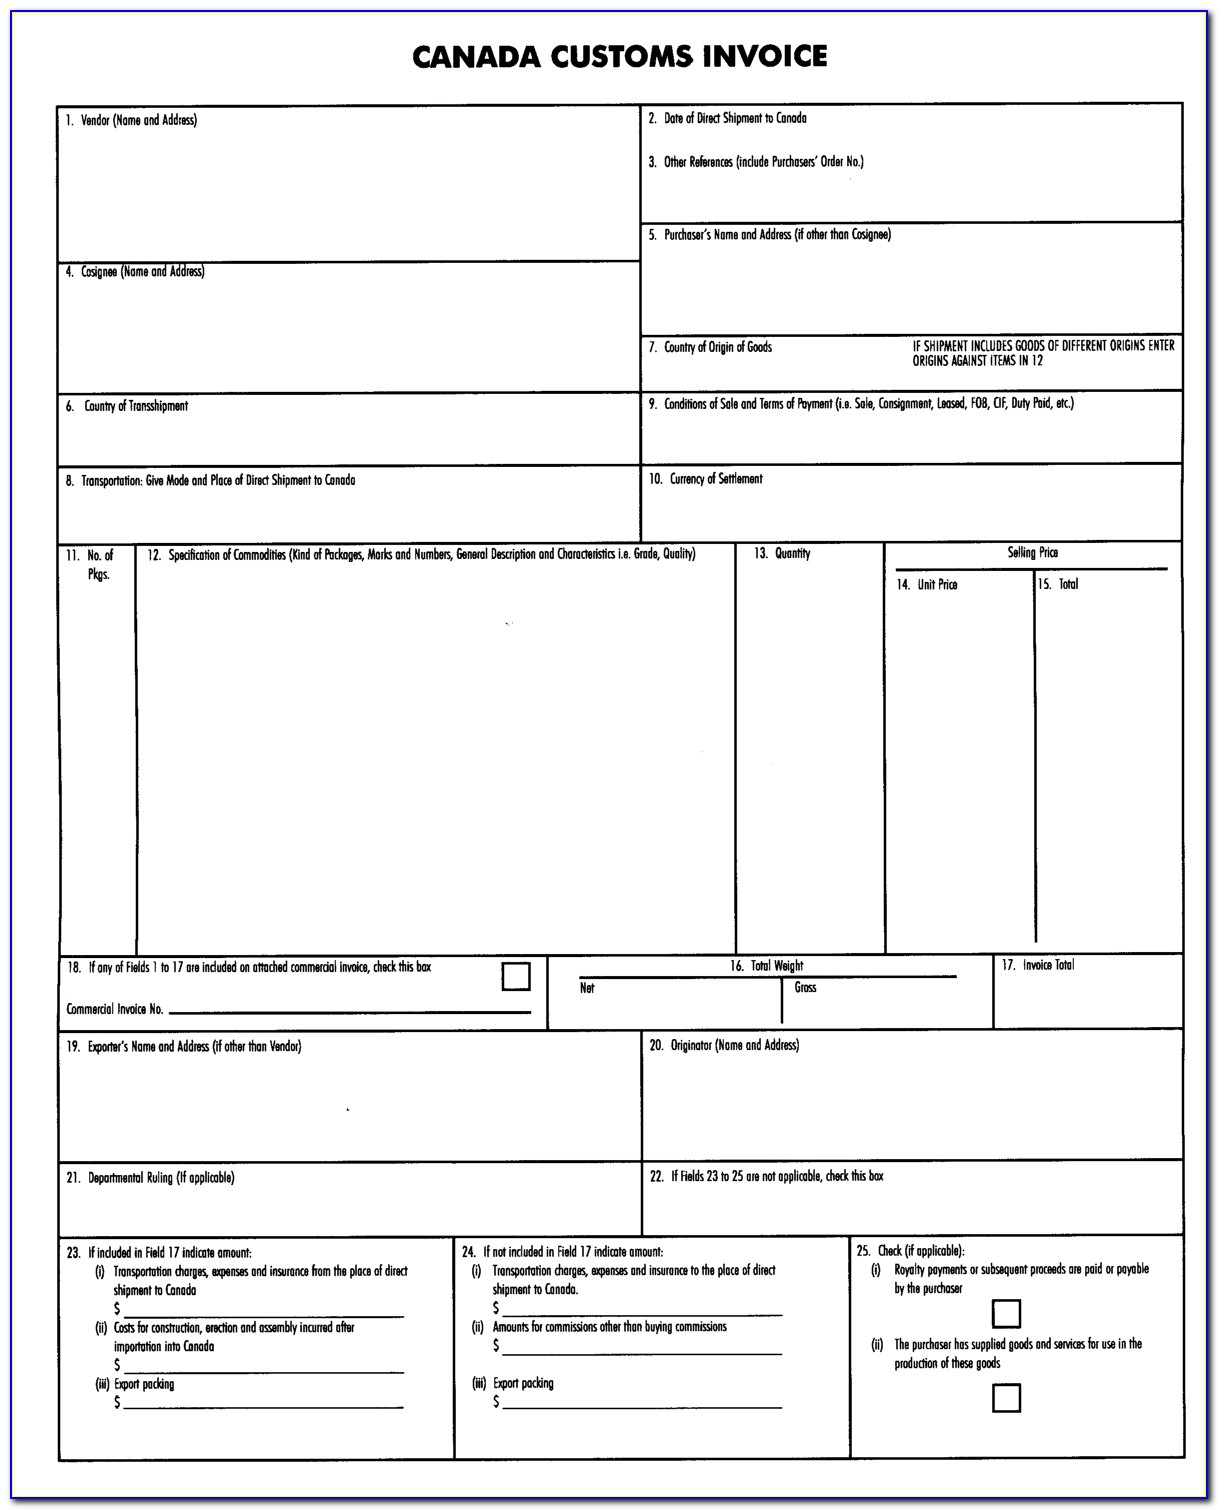 Canada Customs Invoice Form Instructions